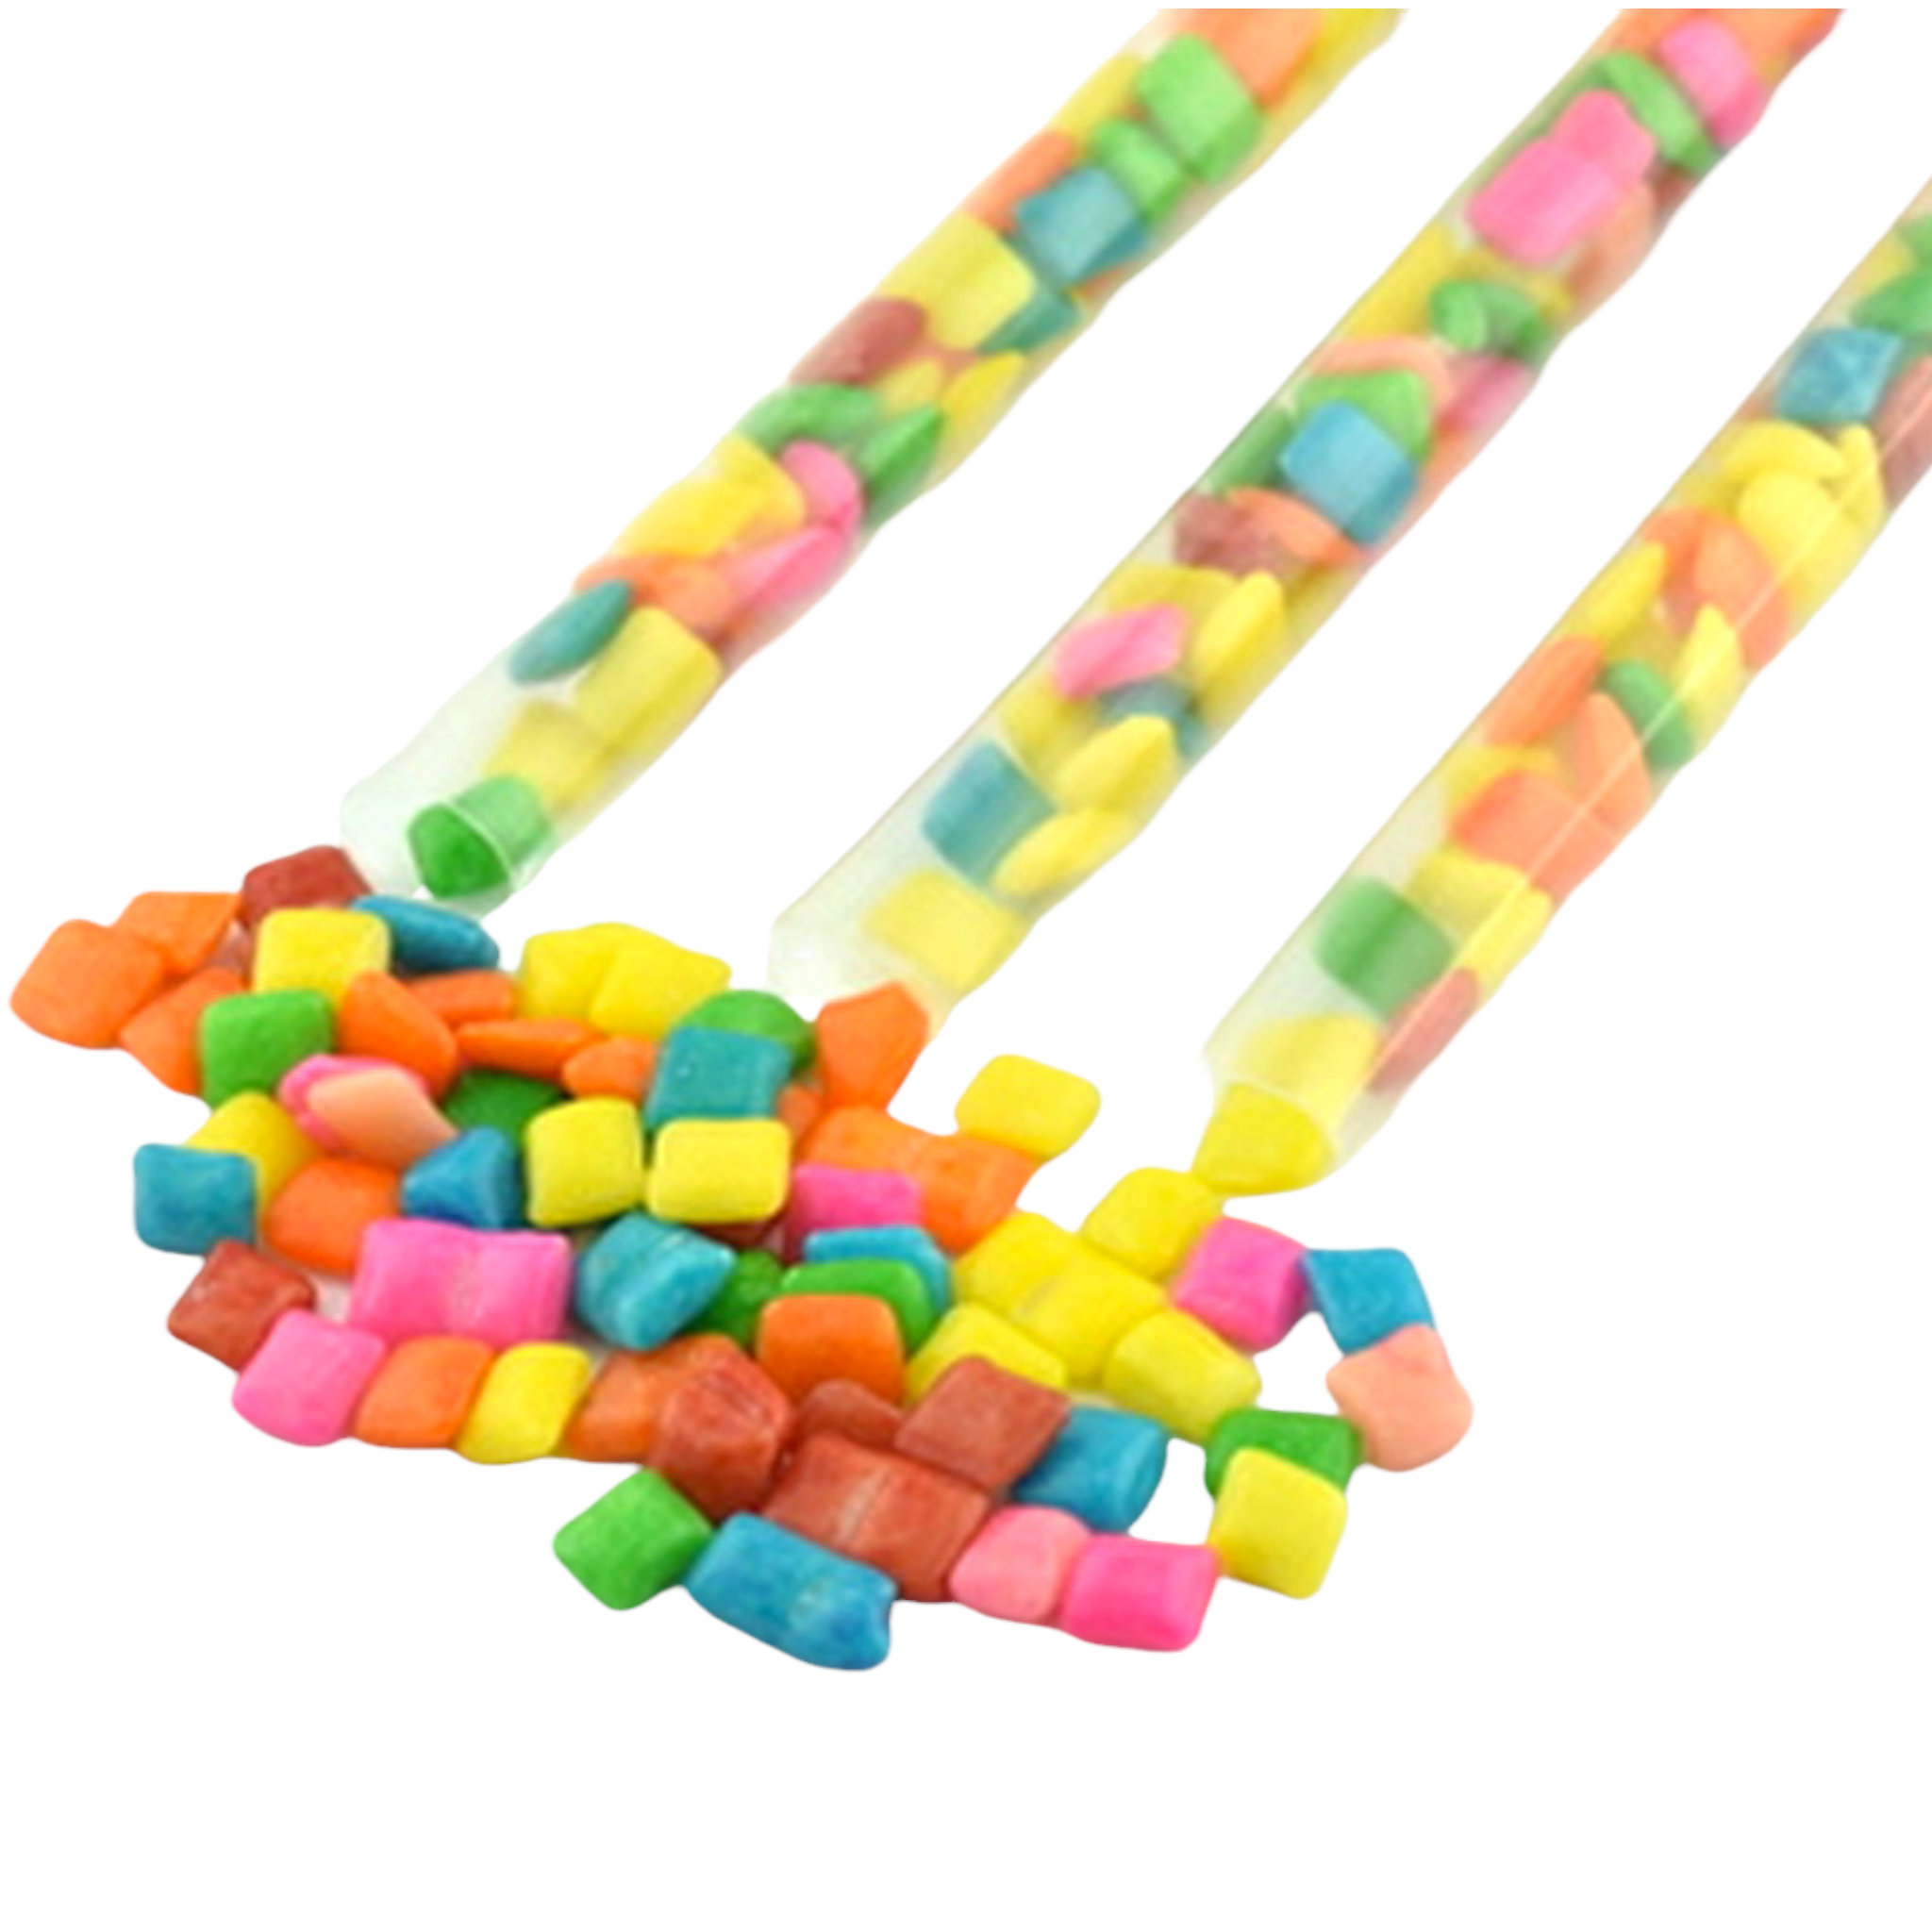 Short Mini Straws - Made in USA by STRAWESOME